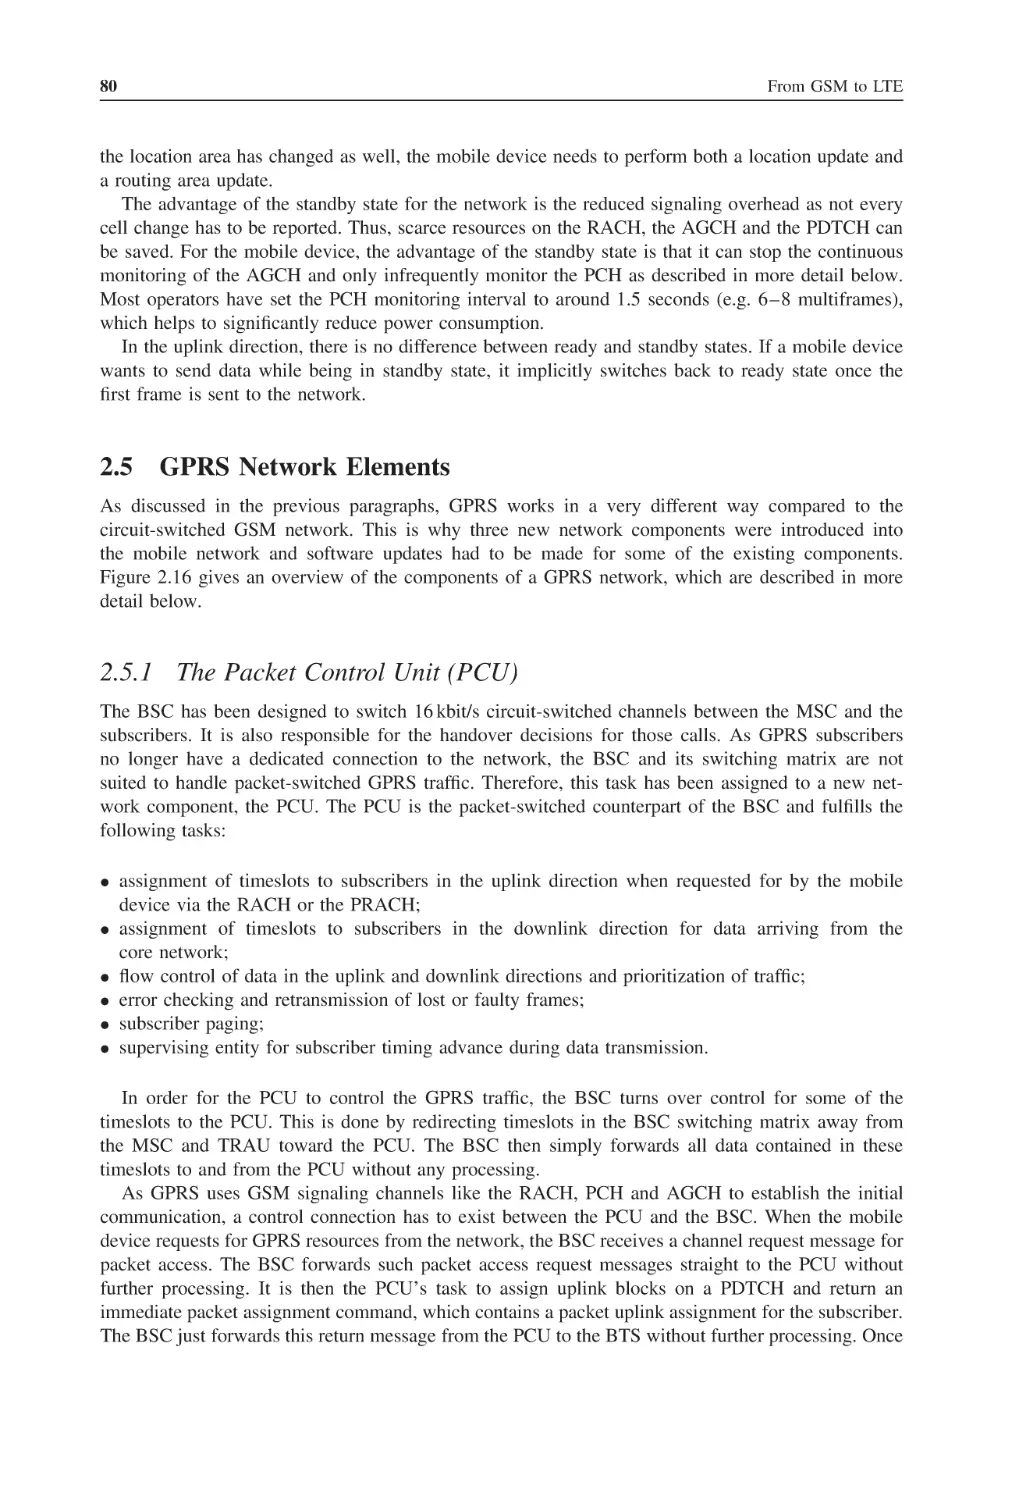 2.5 GPRS Network Elements
2.5.1 The Packet Control Unit (PCU)